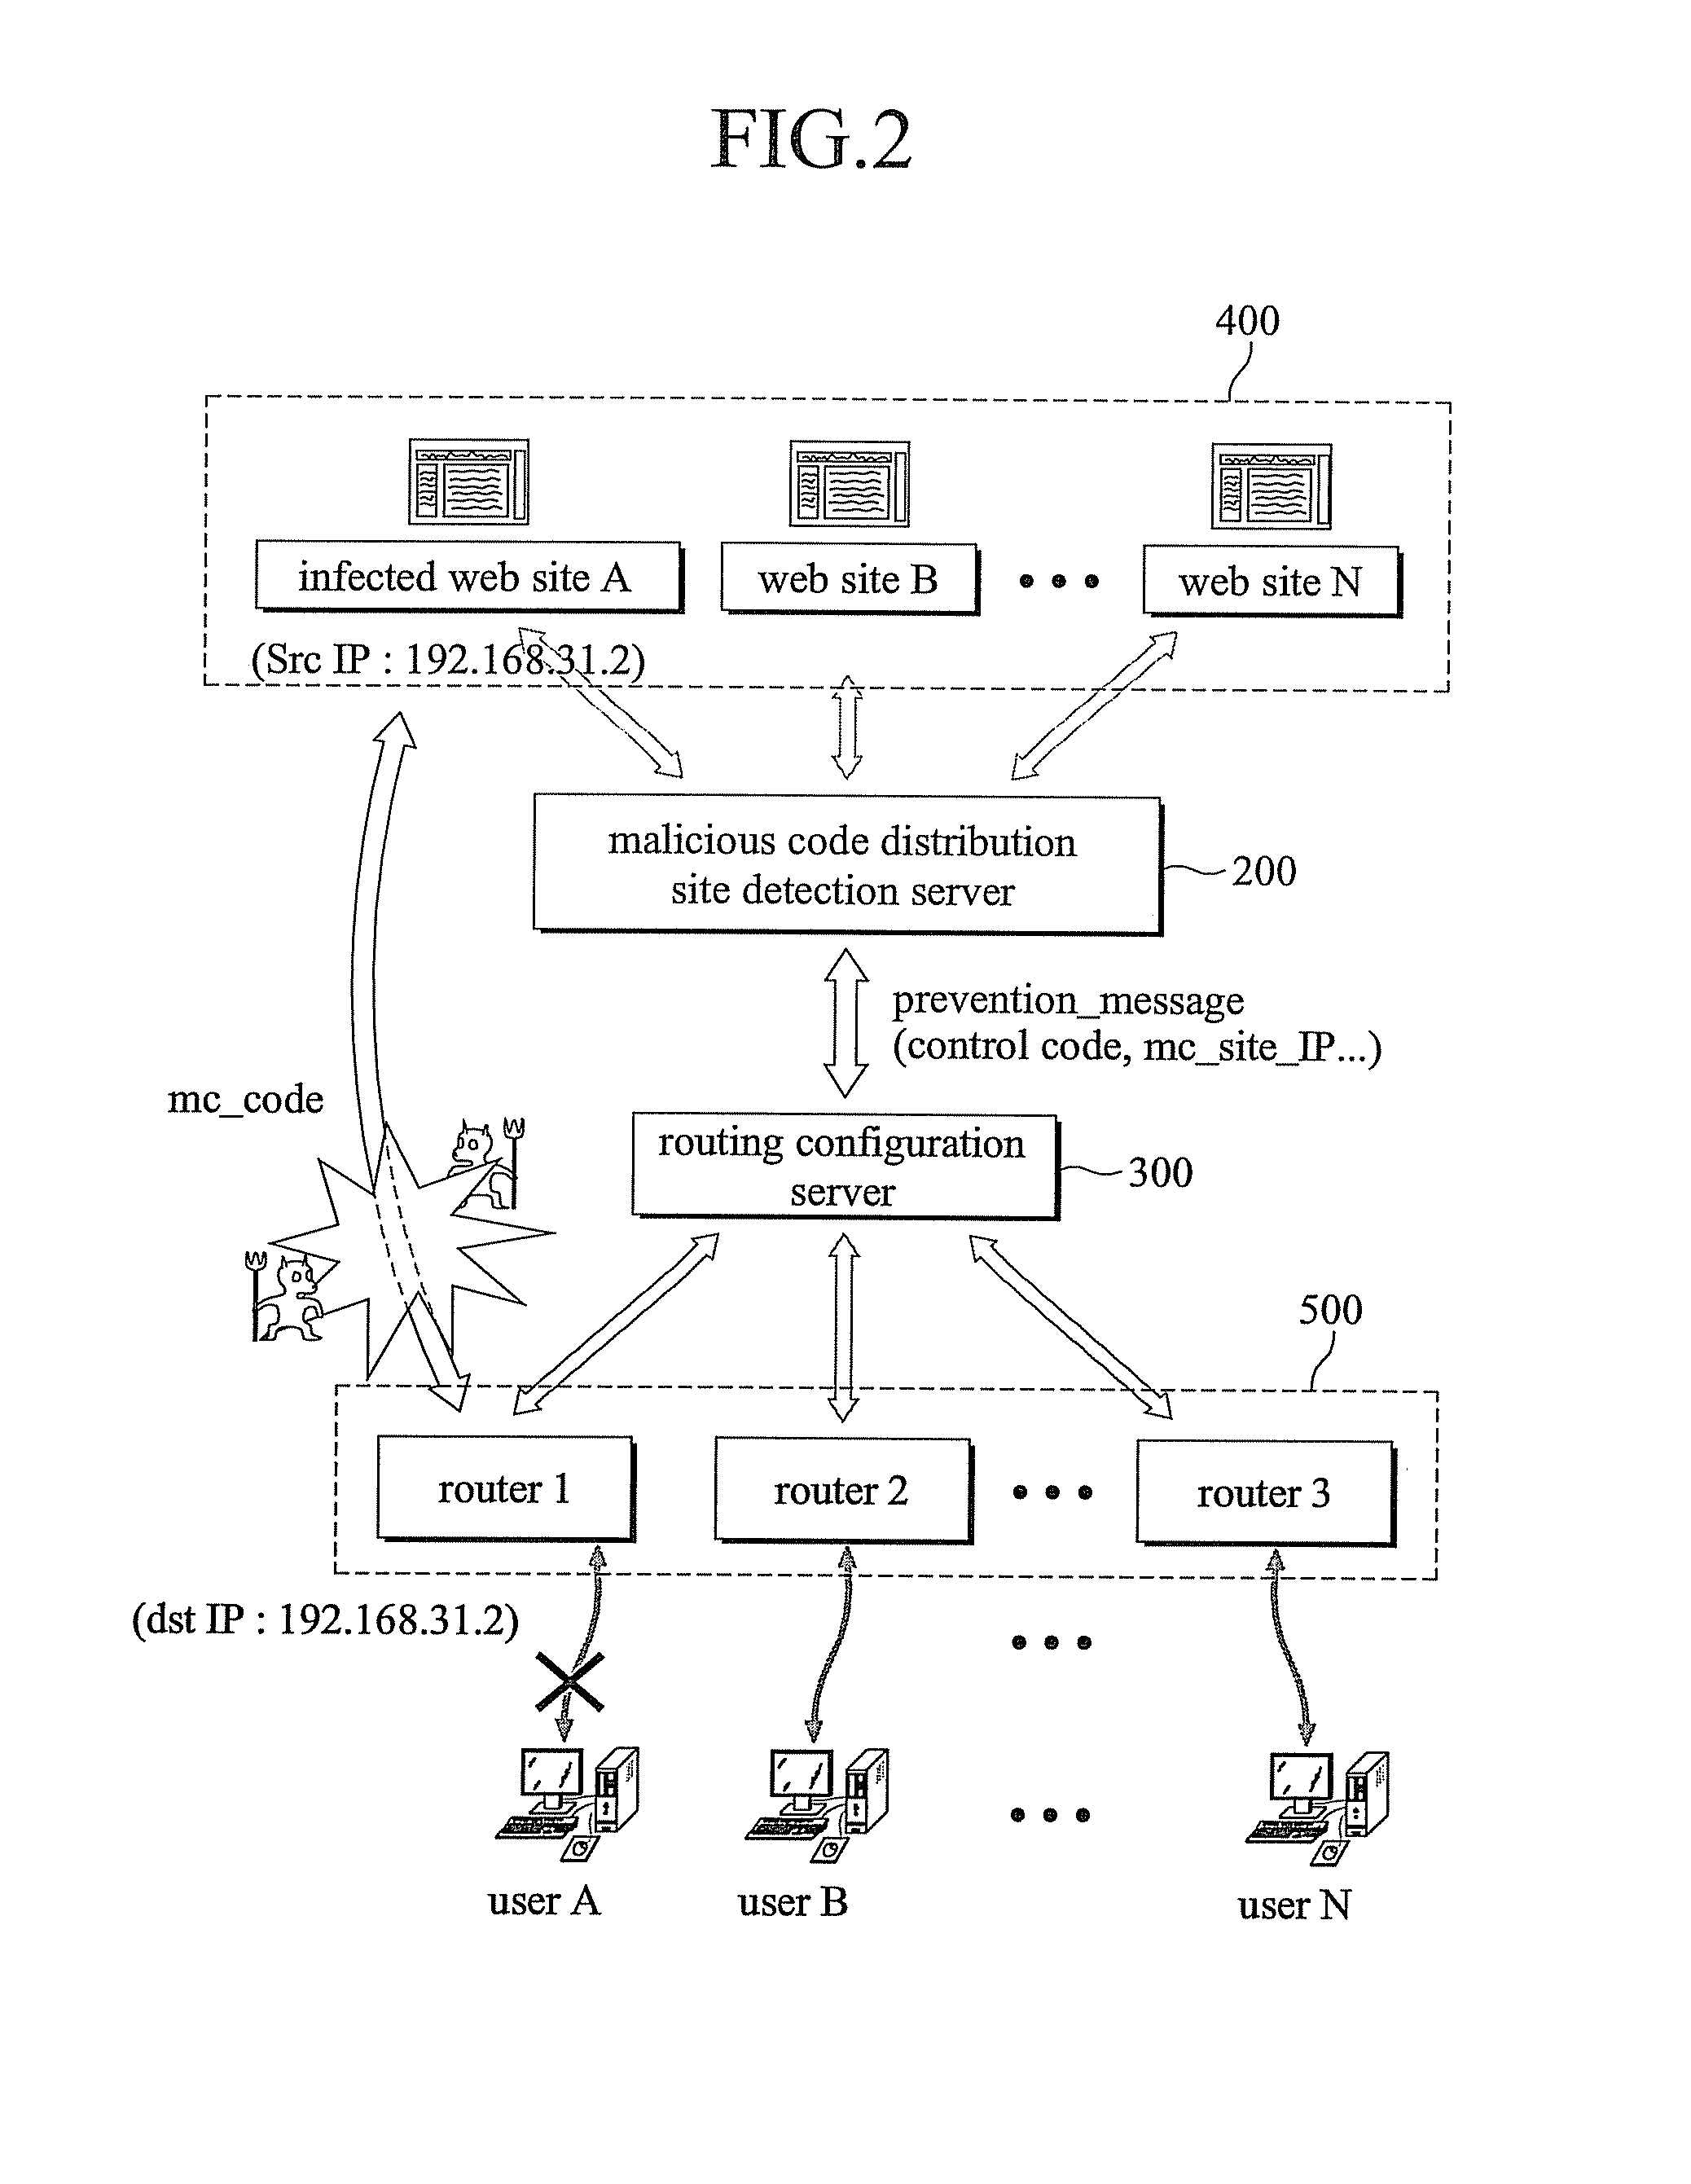 System and method for preventing malicious code spread using web technology